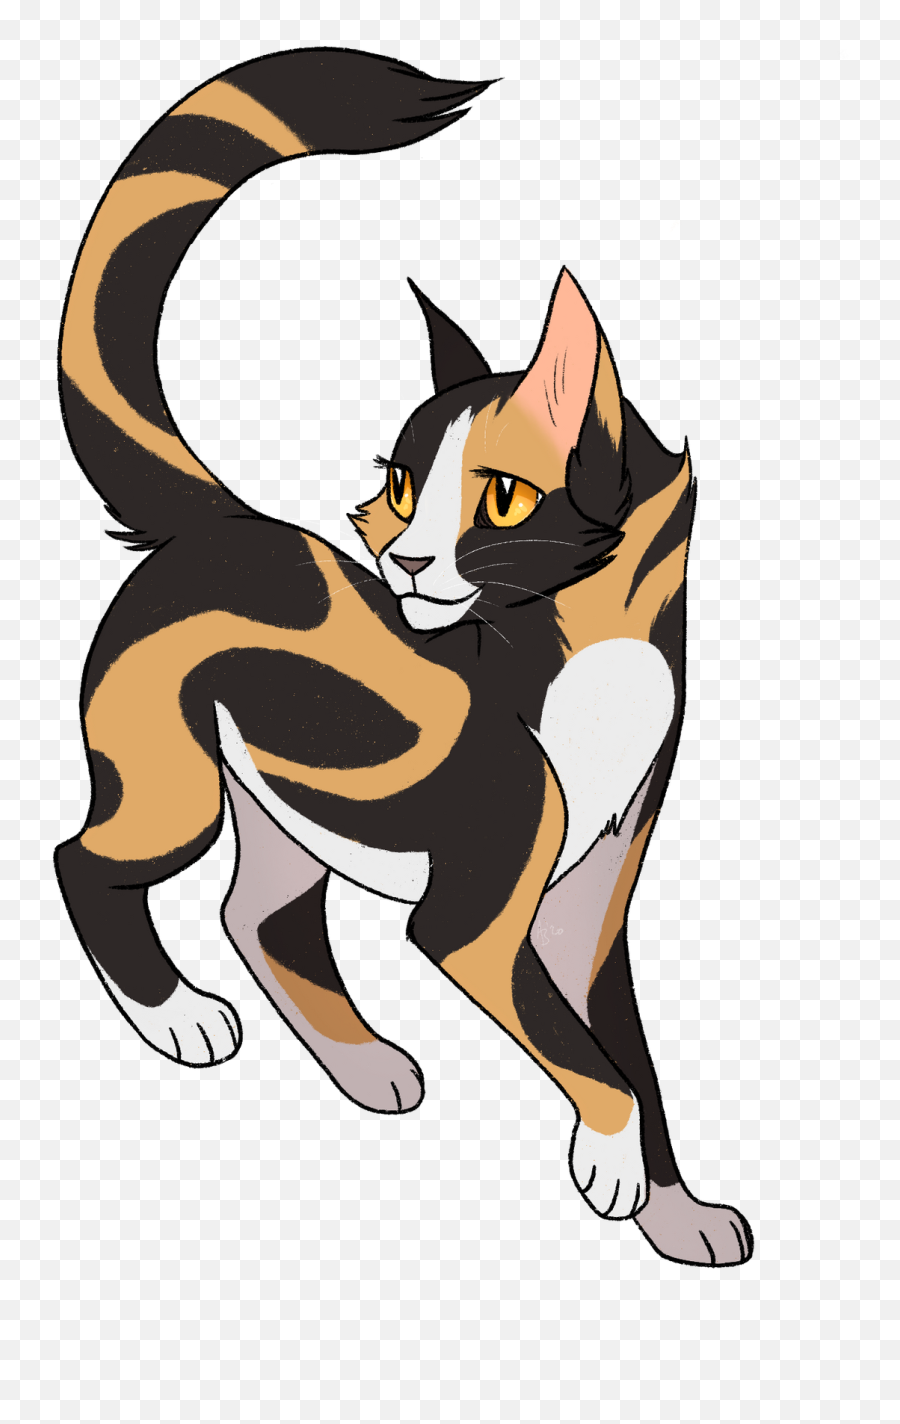 Drawing Due To A Health Issue - Warrior Cats With Swirls Emoji,Emotions As Warriors Drawings